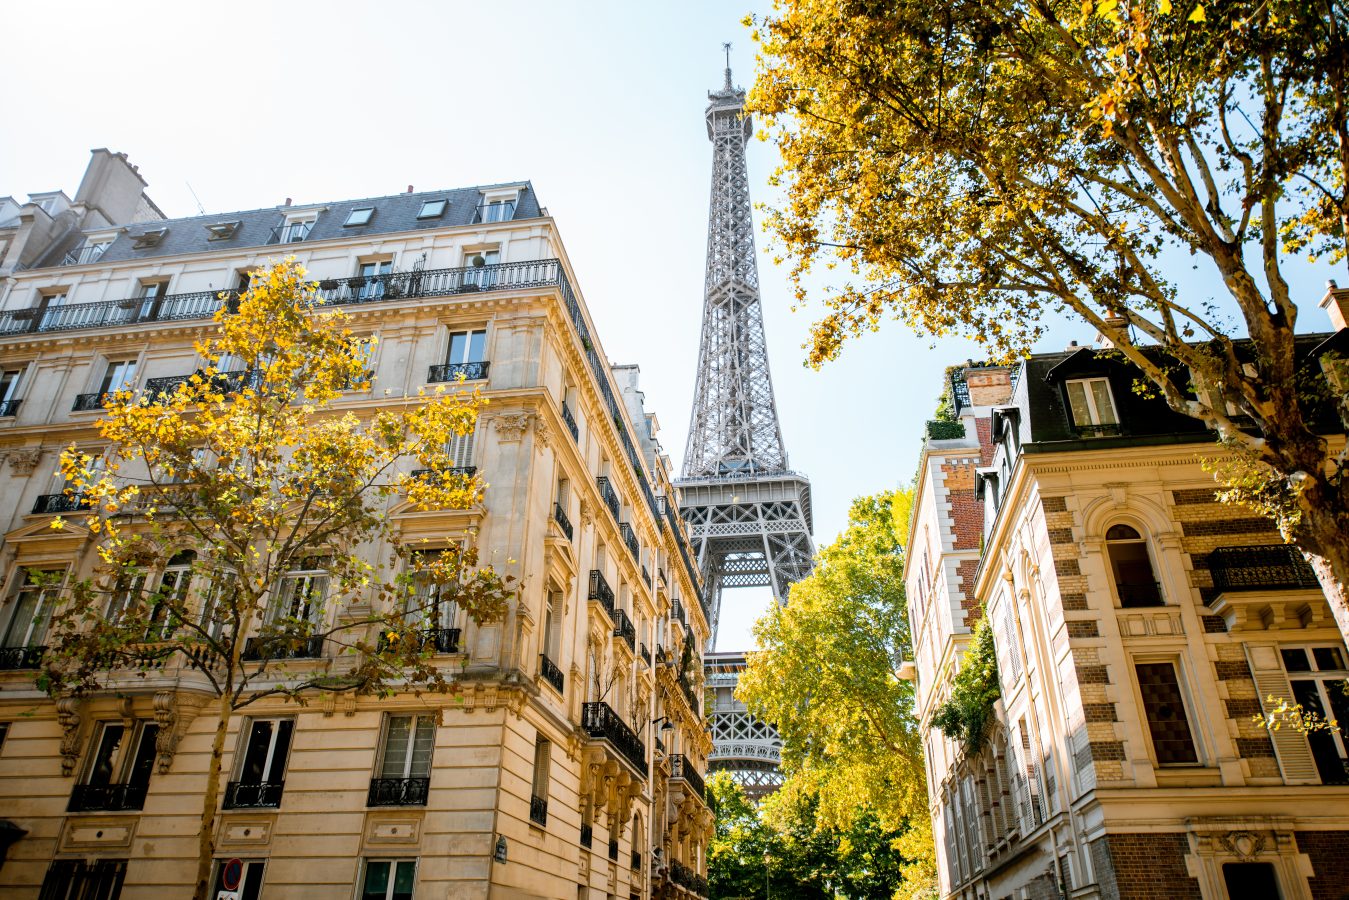 Street view of the Eiffel tower in Paris, France, one of the top destinations for 2023.